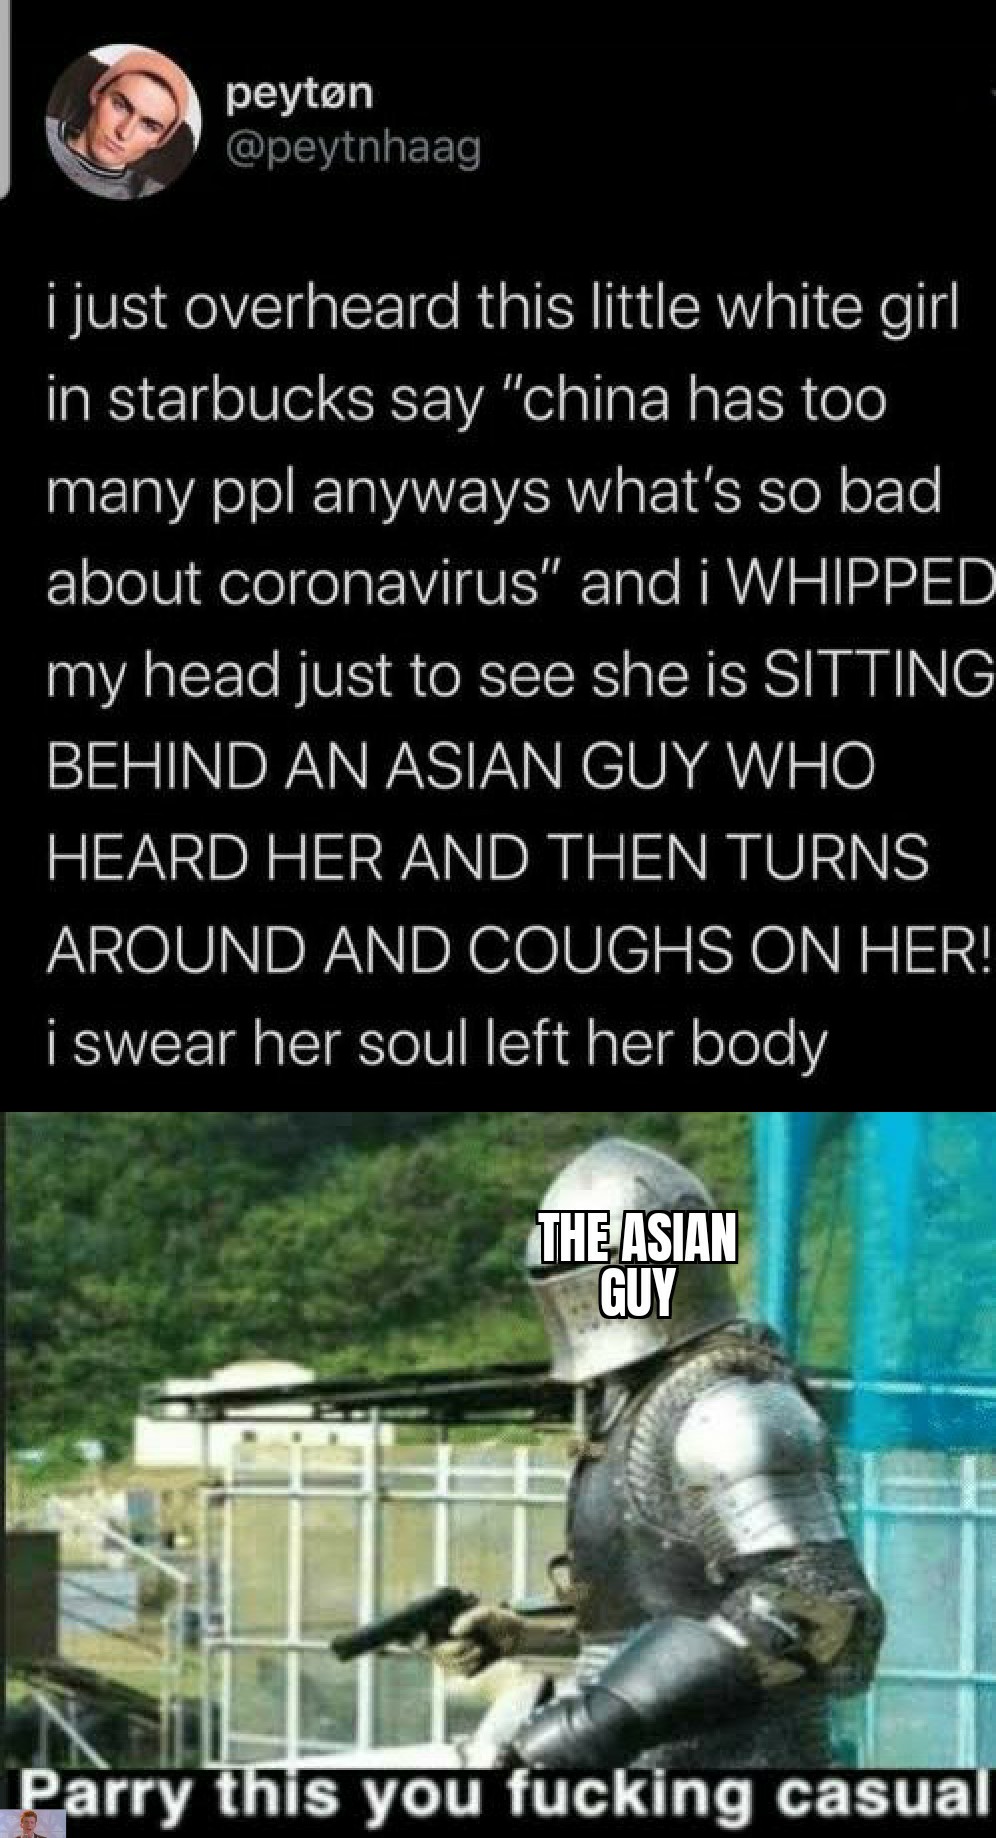 jo kong meme - peyton i just overheard this little white girl in starbucks say "china has too many ppl anyways what's so bad about coronavirus" and i Whipped my head just to see she is Sitting Behind An Asian Guy Who Heard Her And Then Turns Around And Co